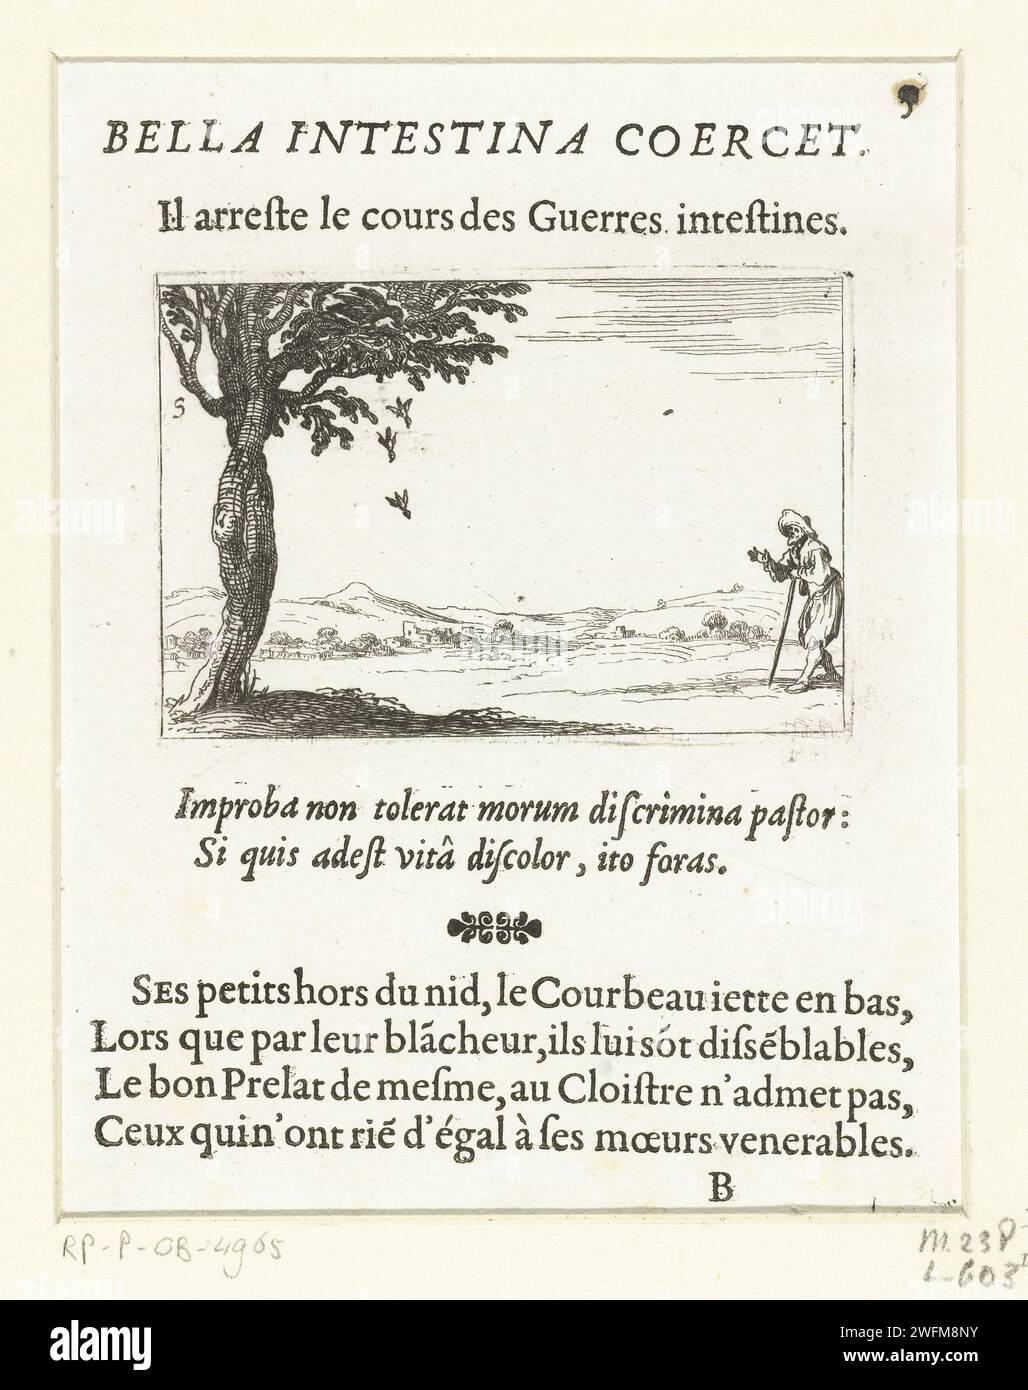 A raven throws young from his nest, Jacques Callot, 1646 print Presentation of a raven that pushes some young (the one with white feathers) out of his nest. A man with a walking stick watches. Above and below this print Latin and French texts in book print. This magazine is part of the emblem series 'Monastic Life in Emblemen'. In addition to an illustrated title page and 26 emblems, the second state of this series is a title page and a magazine with assignment, both in book print without image. print maker: Nancypublisher: Paris paper etching / letterpress printing song-birds: raven. animals Stock Photo